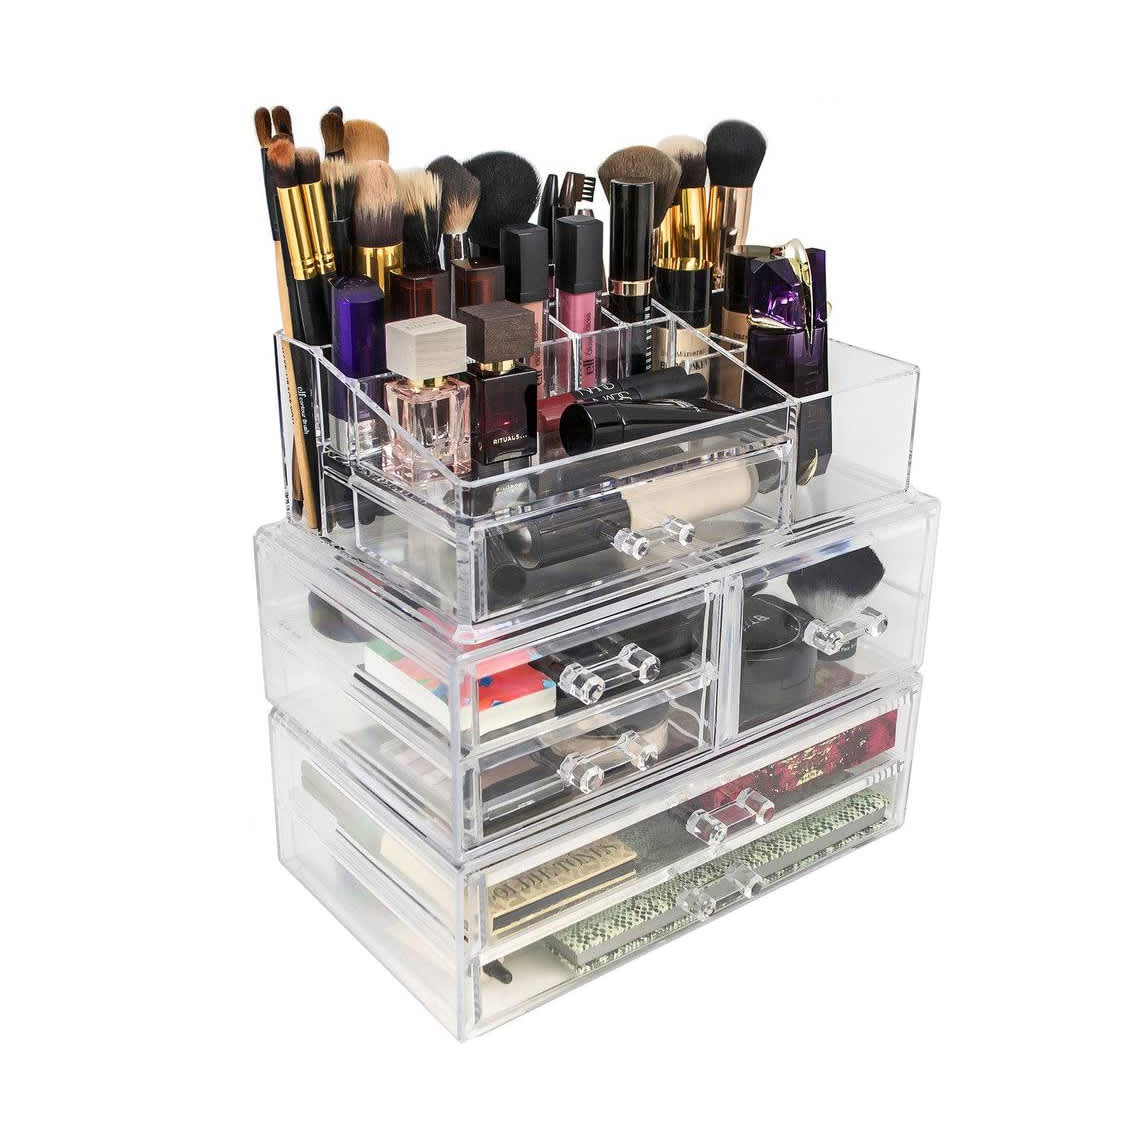 Understand the difference between acrylic organizer vs polystyrene  organizers - Beauty Makeup Supply